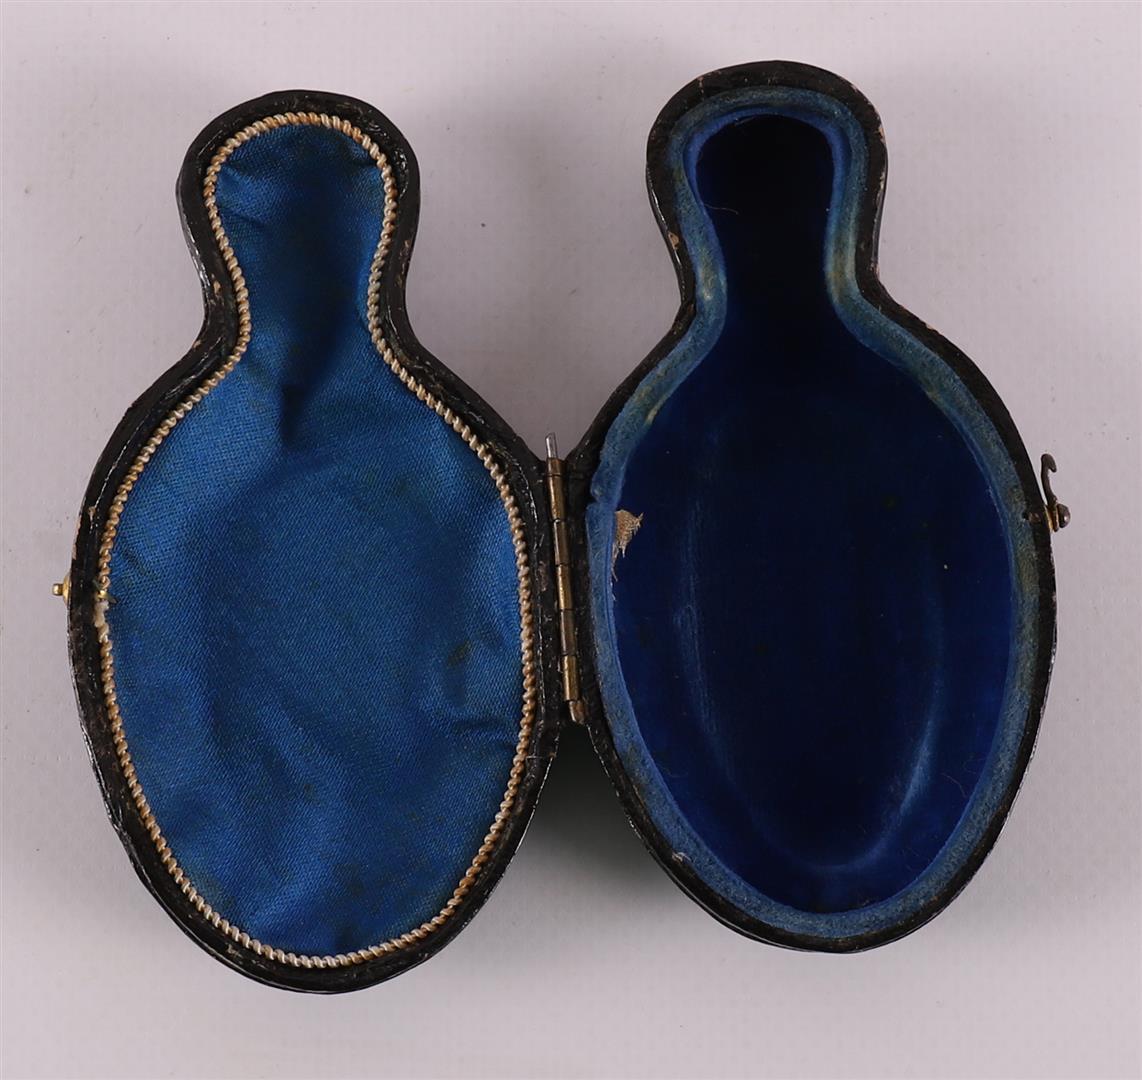 A clear crystal odor flask with gold lid and frame, around 1900 - Image 4 of 8